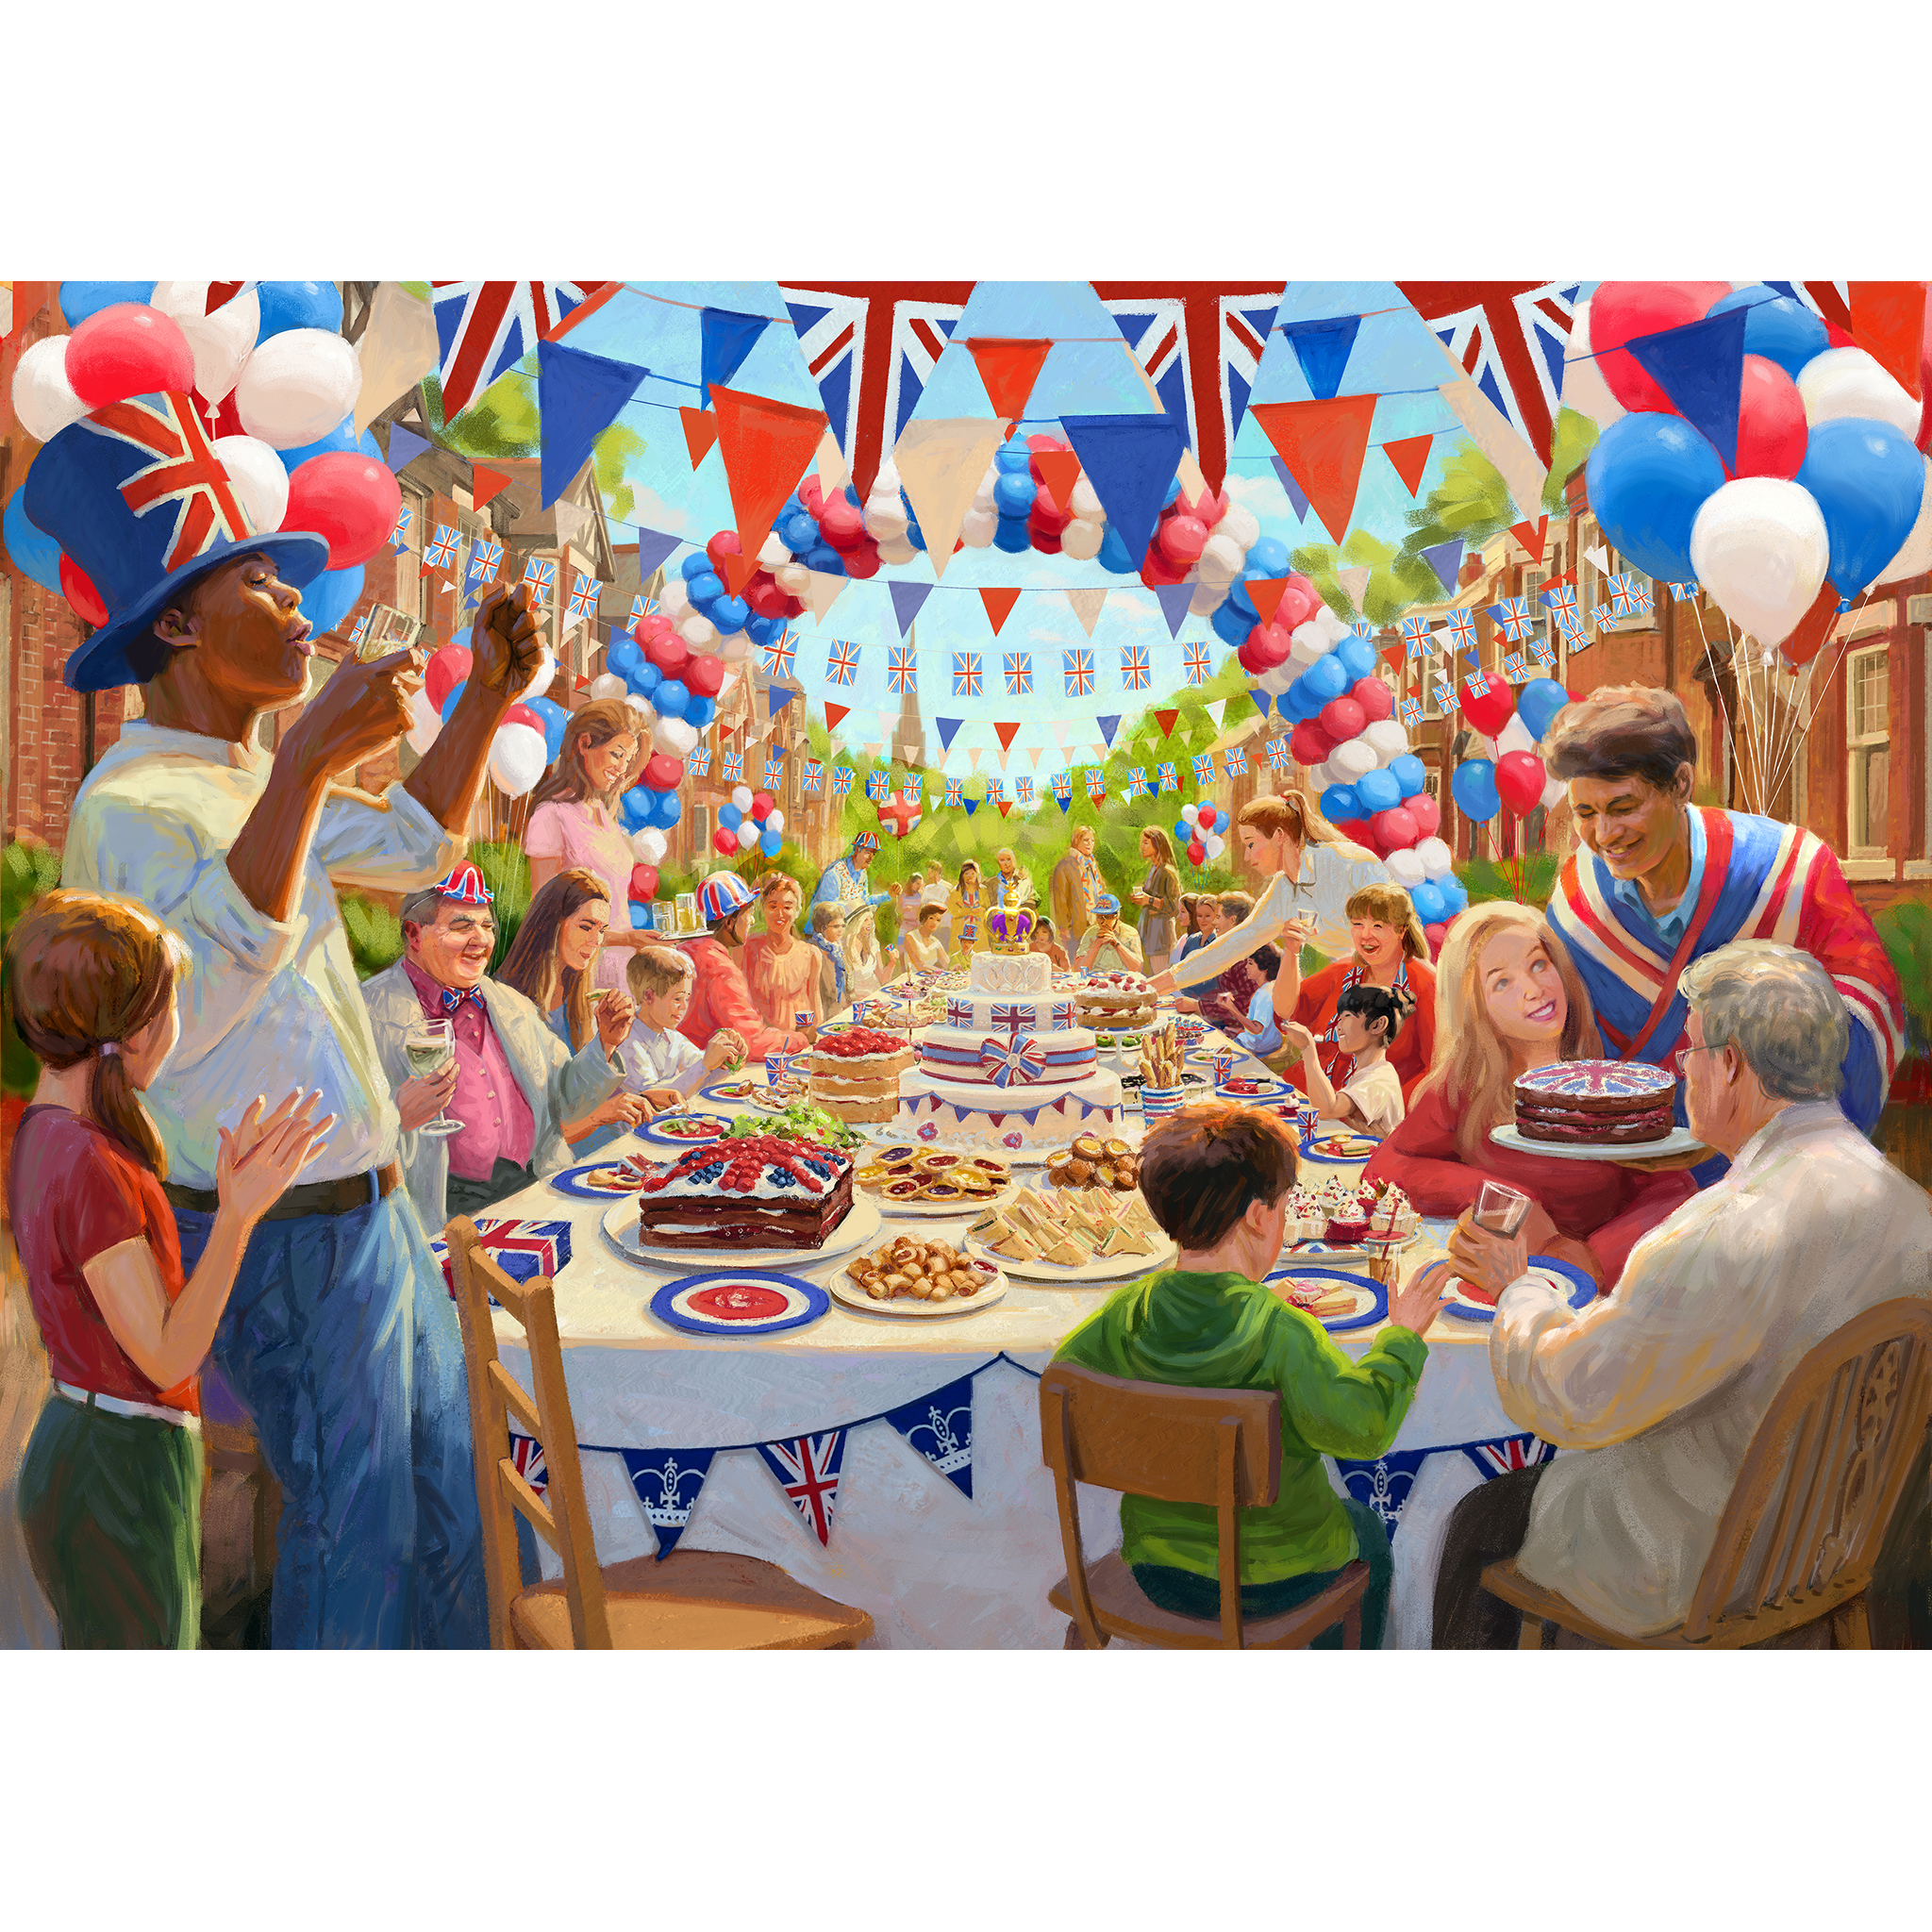 gibsons 4 puzzles - royal celebrations 500 teile puzzle -g5061